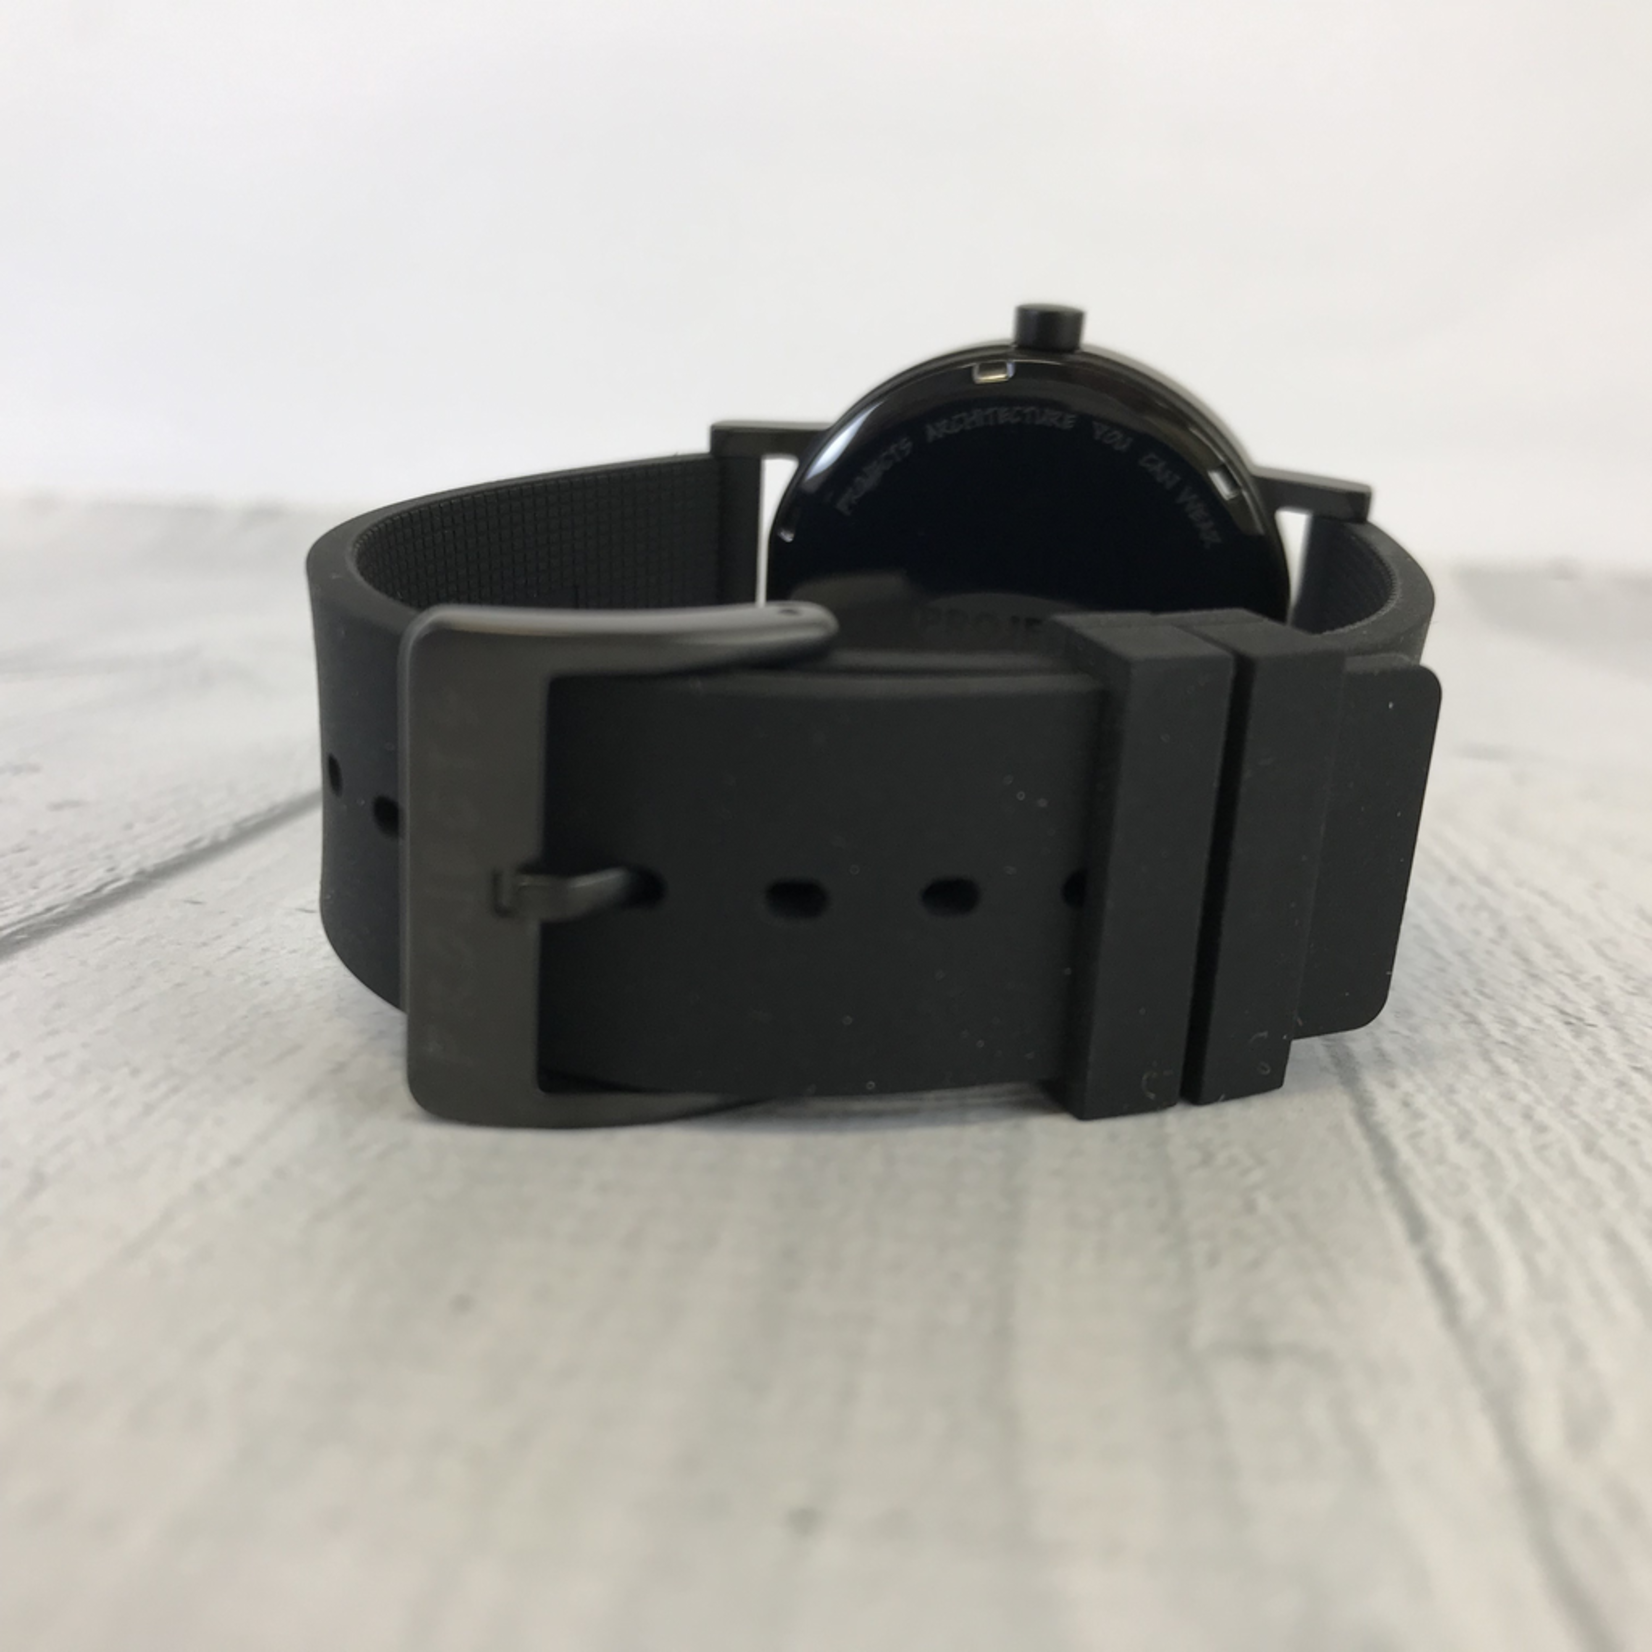 PROJECTS ‘Till Watch, 40mm Black face with Black Silicone Band